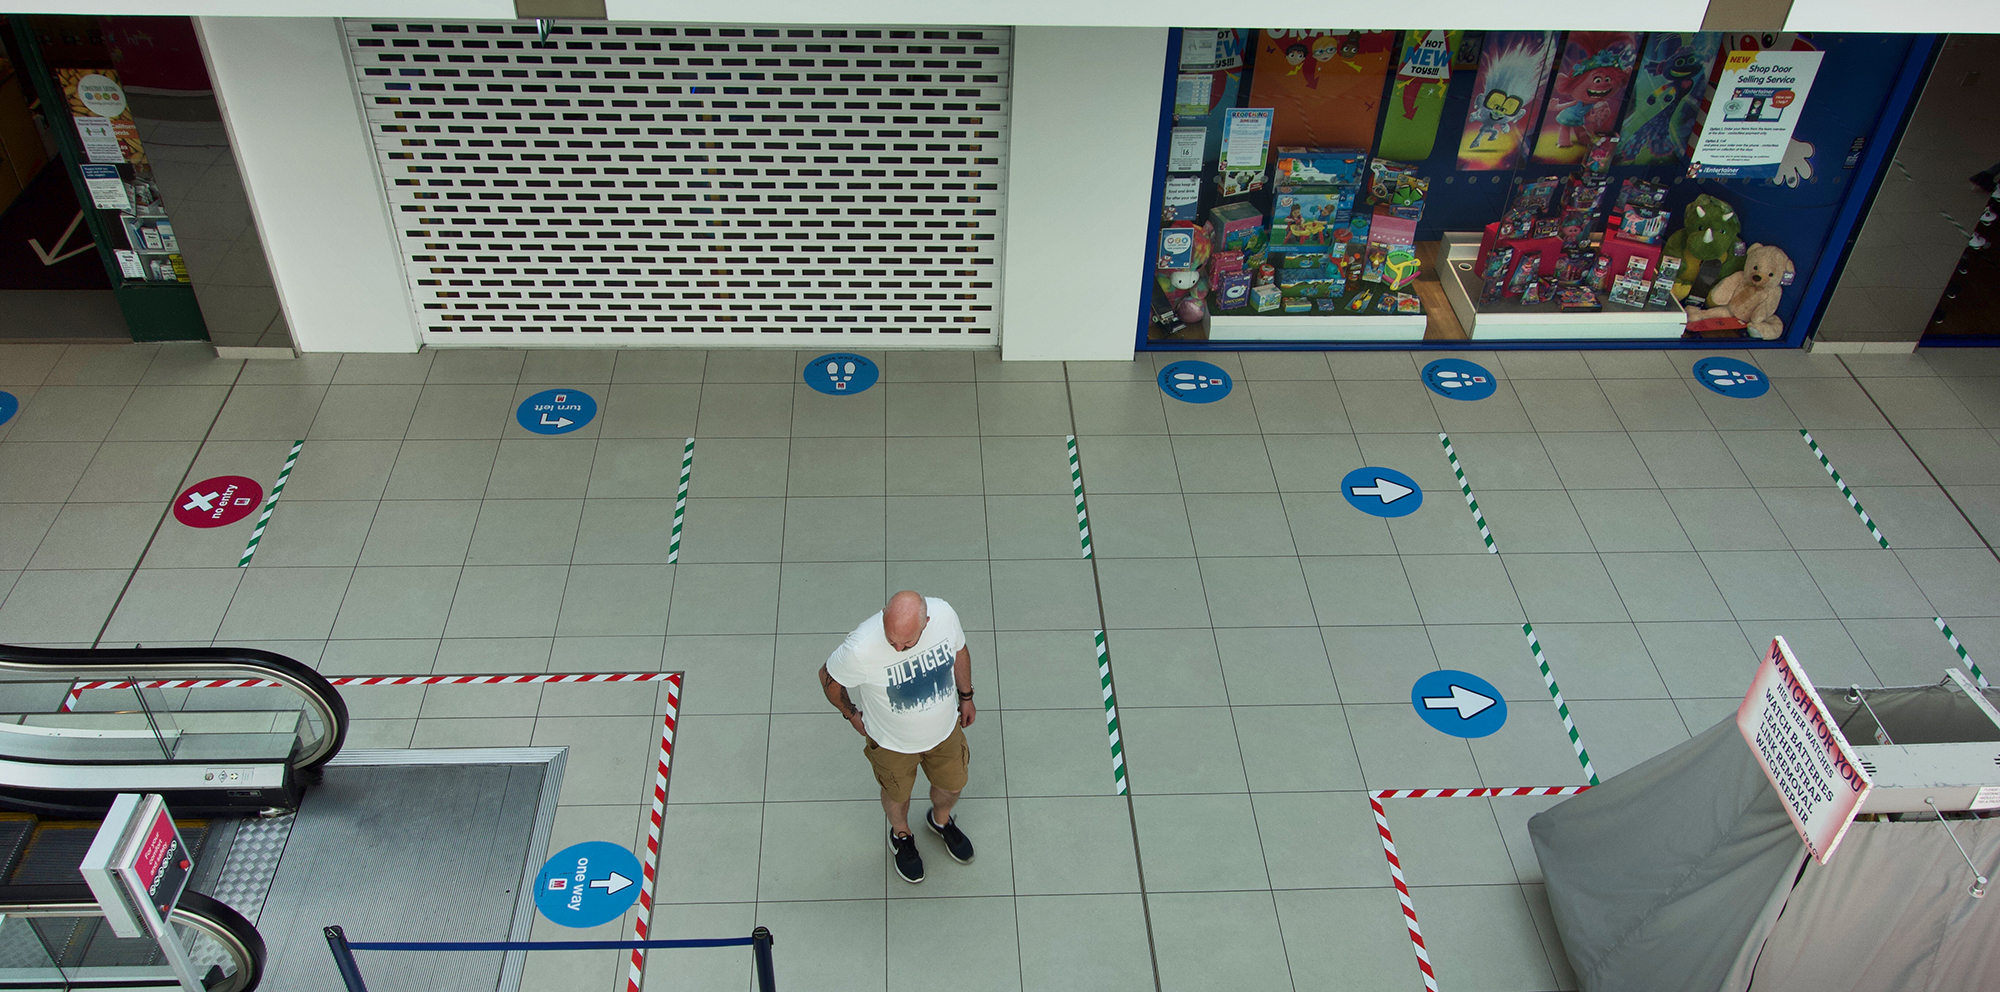 Interior of a shopping mall with one person marked with social distancing stickers